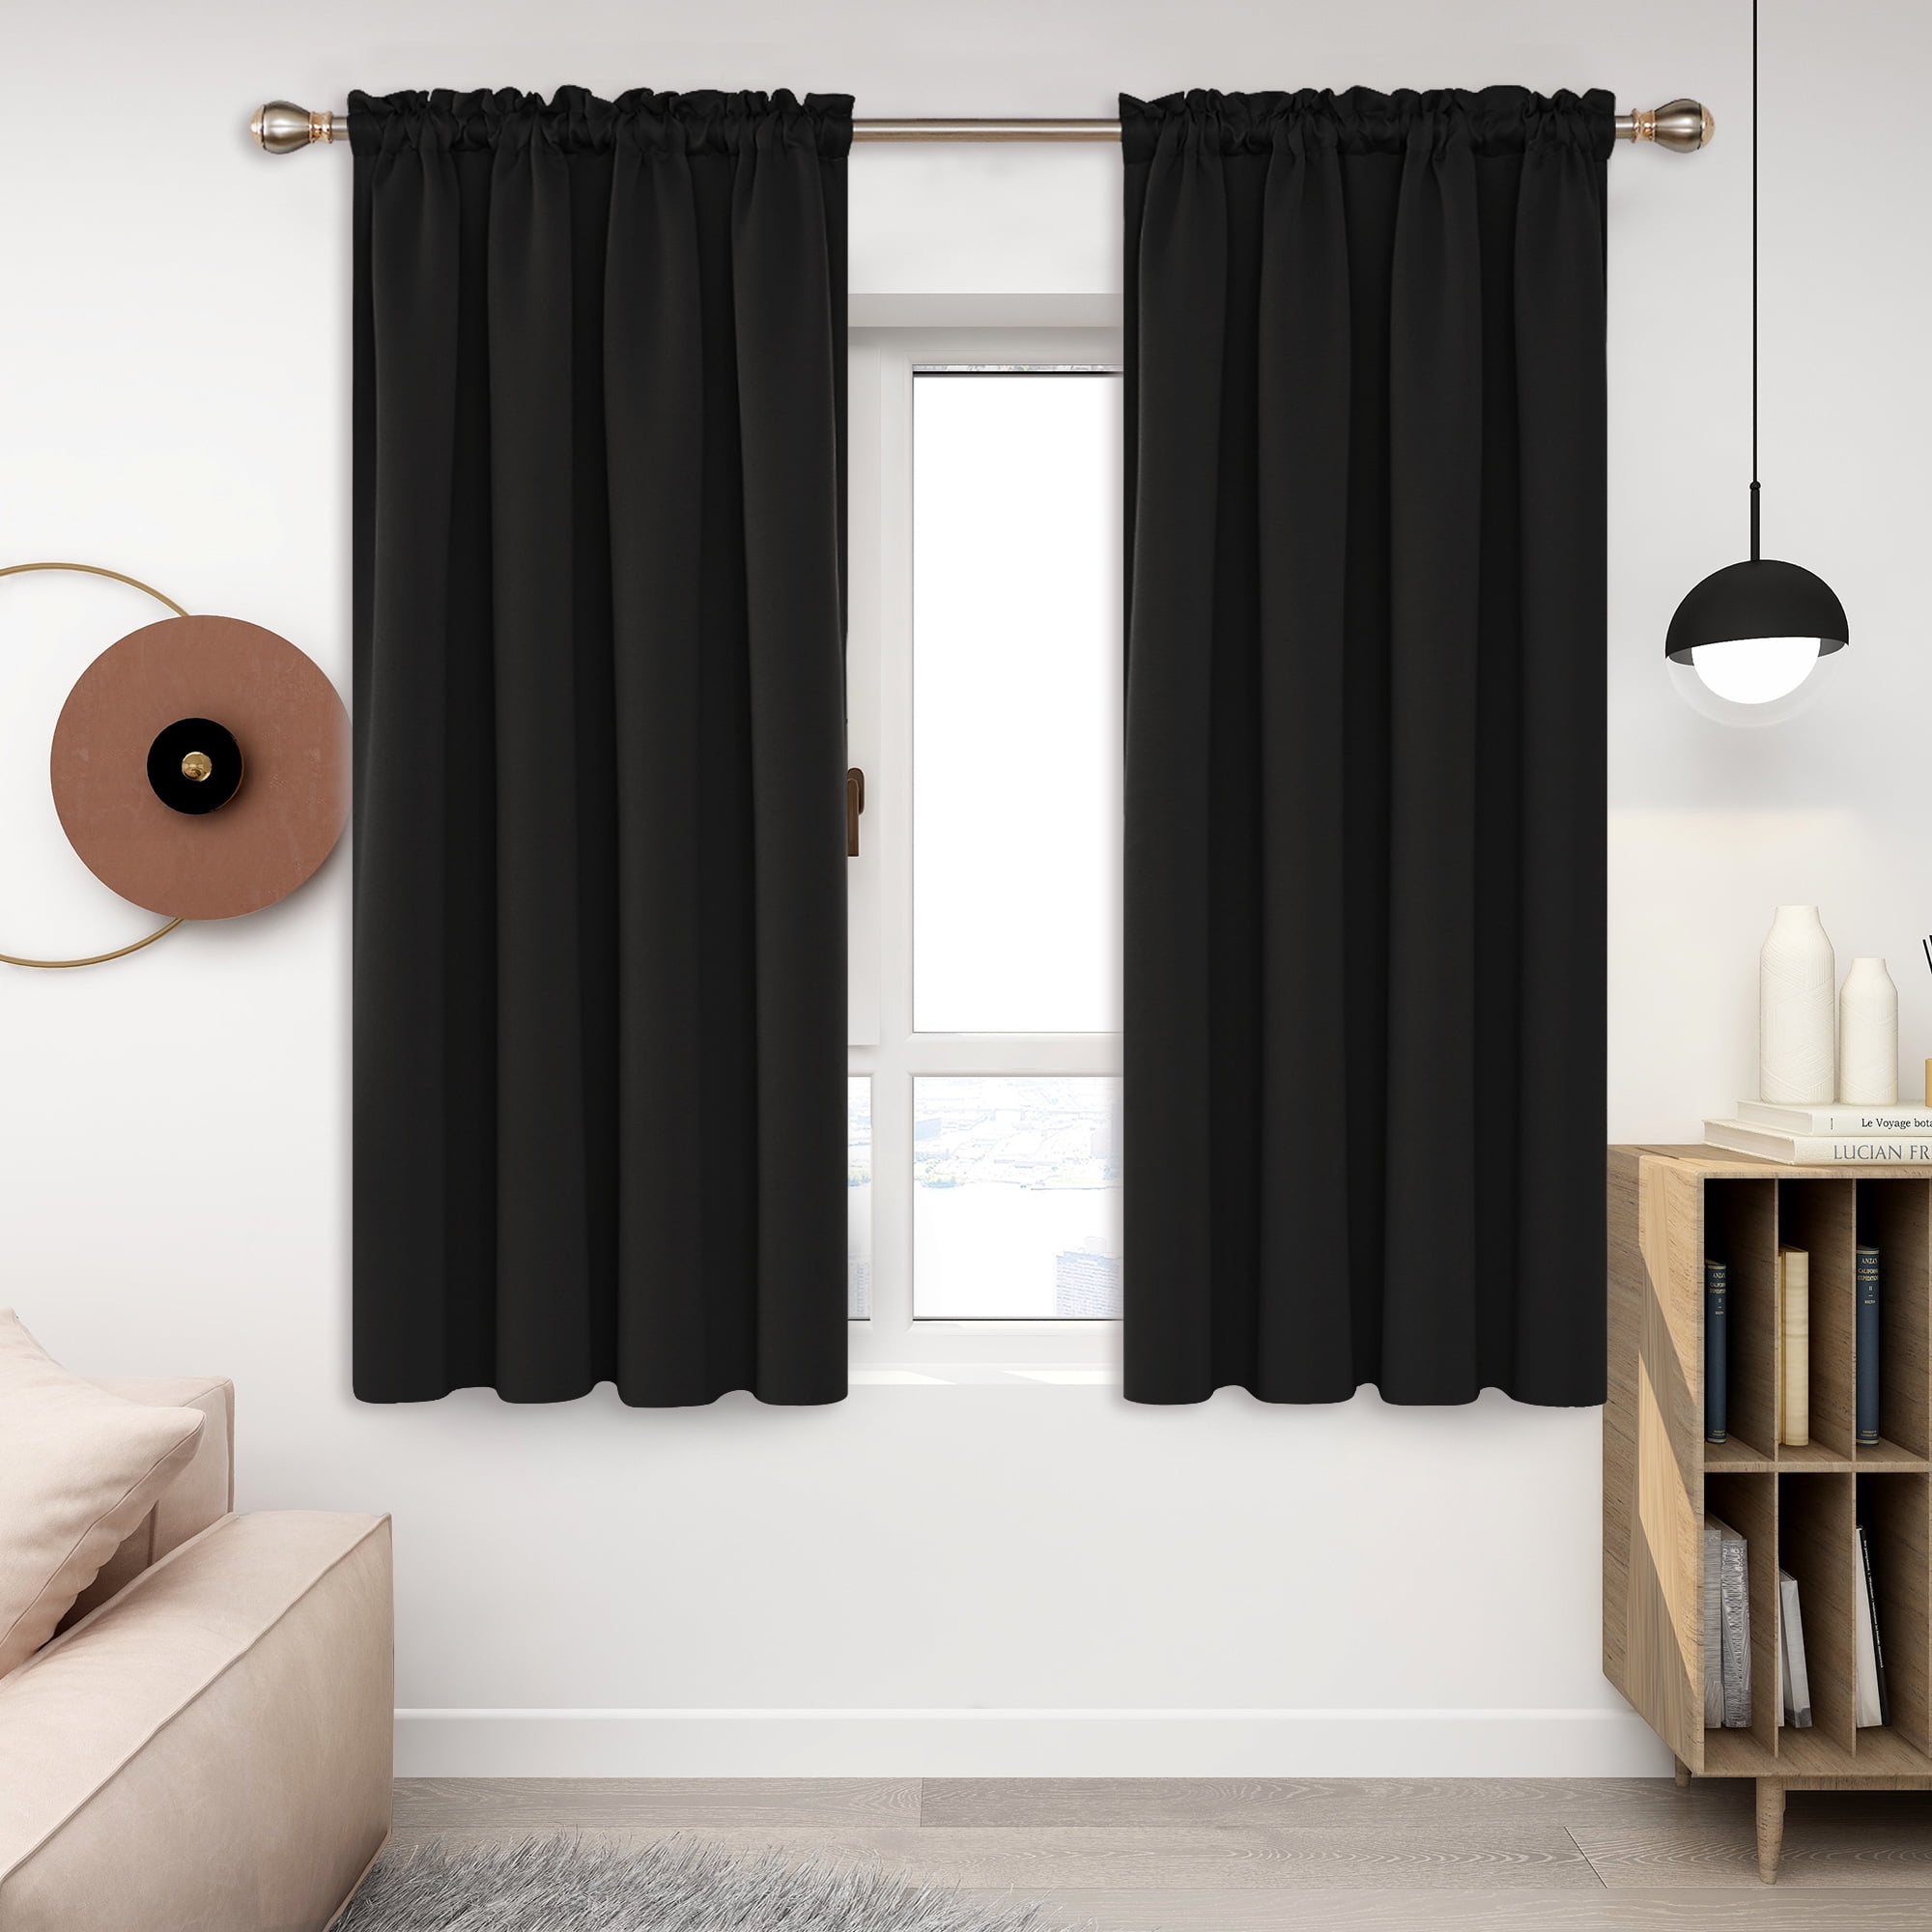 Deconovo Blackout Curtains Rod Pocket Curtain Panels Thermal Insulated  Curtains for Dining Room 52 W x 54 L inch 2 Panels